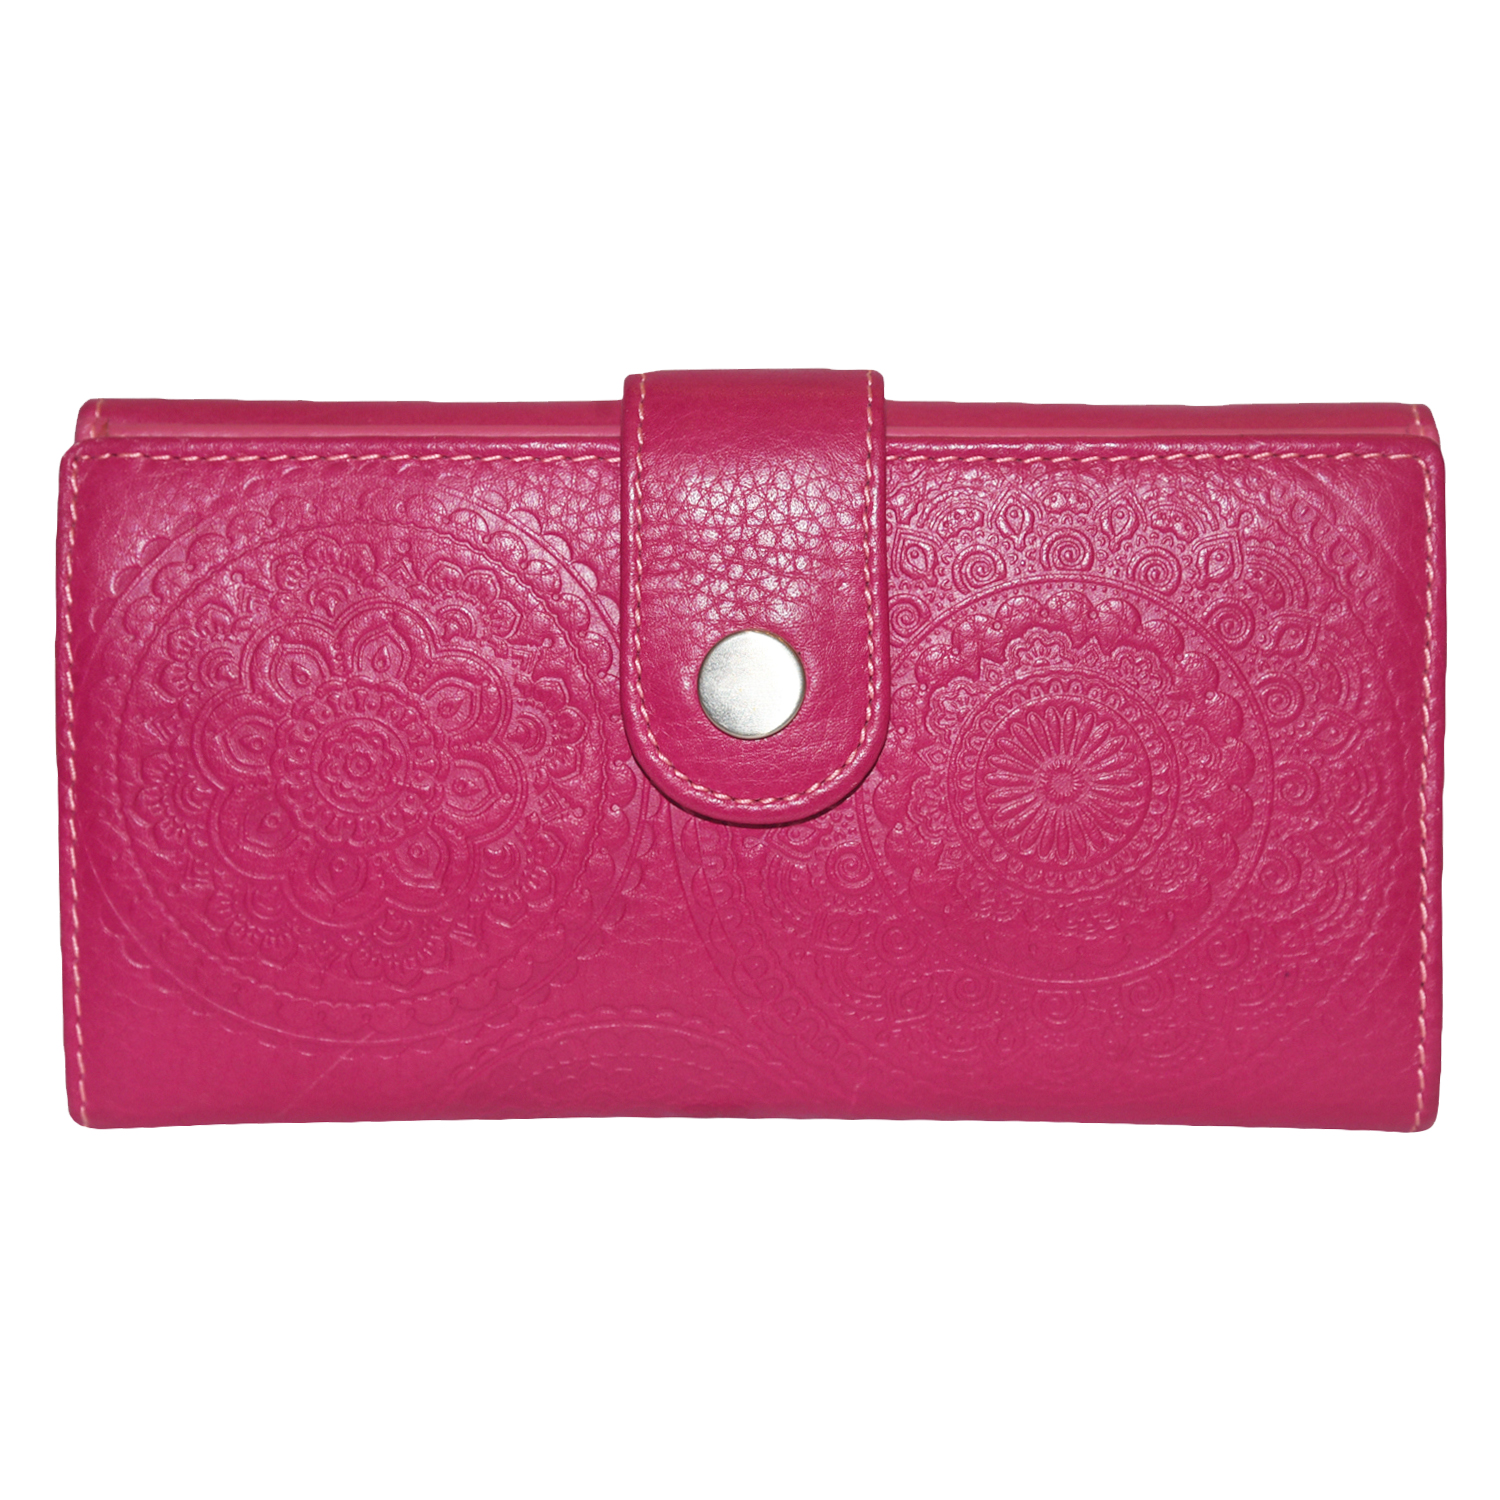 pink leather travel wallet